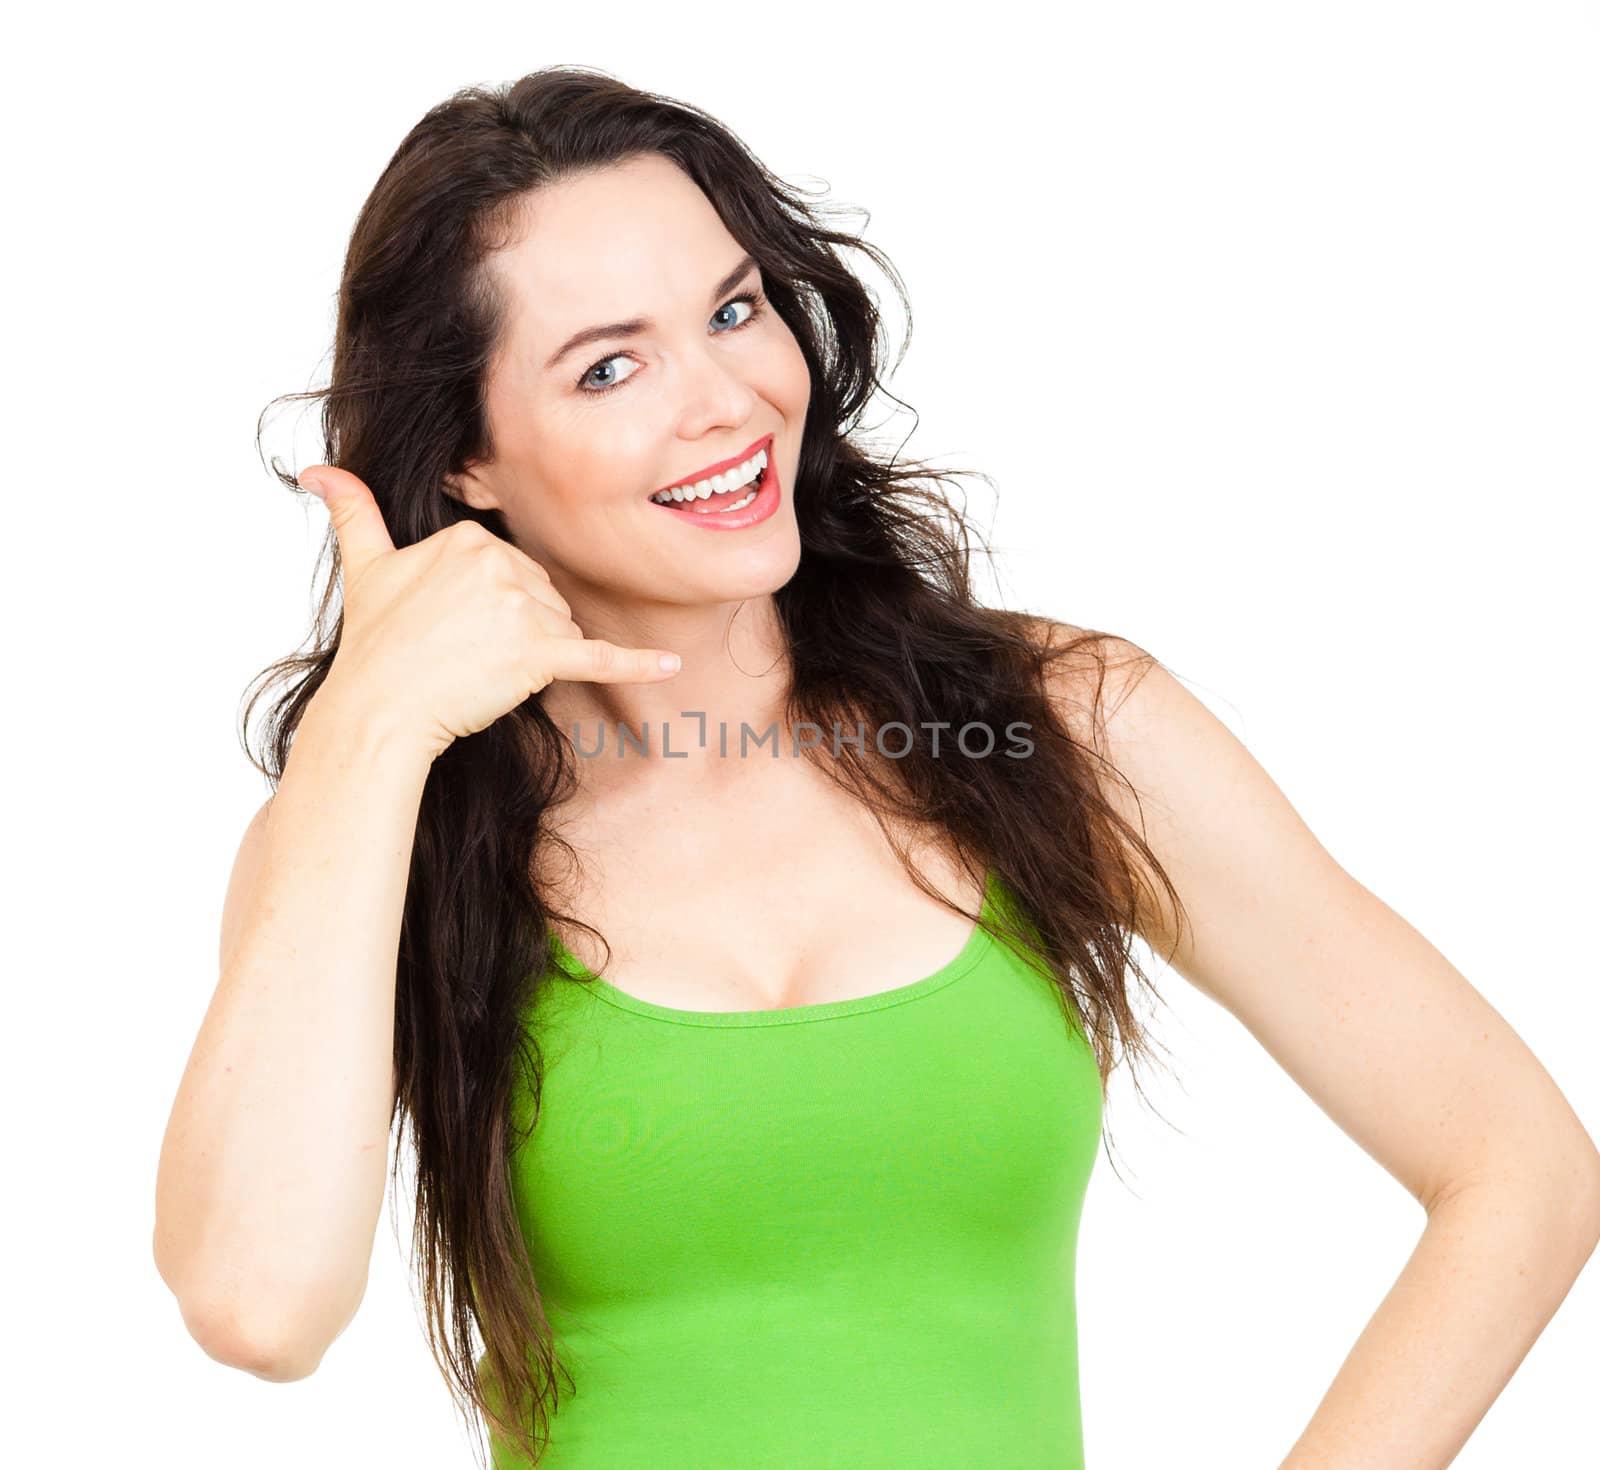 CLose-up of a  beautiful young woman smiling and making a call me sign. Isolated over white.